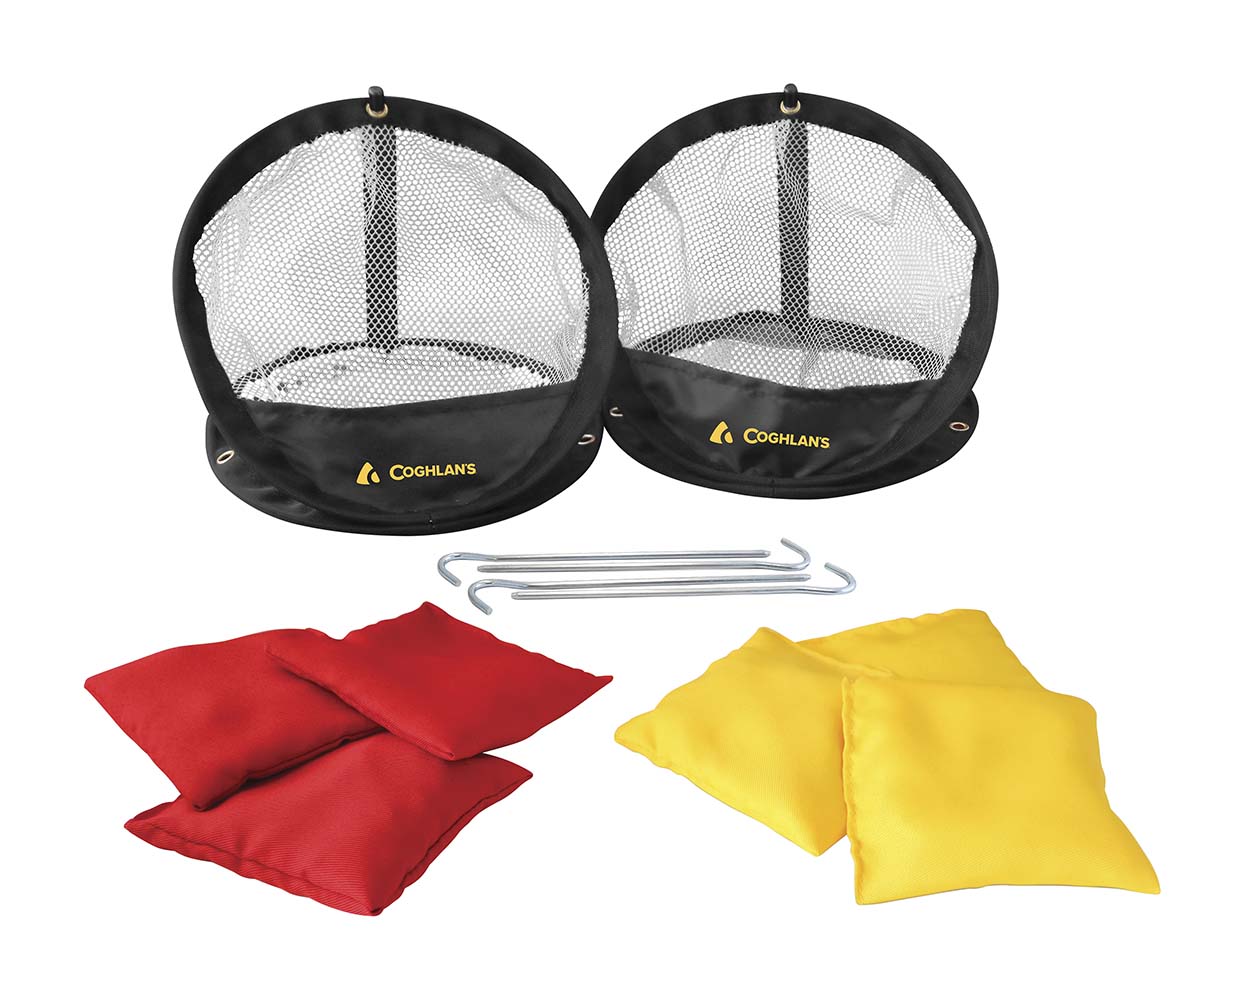 7692185 A classic throwing game. Throw the bags in the net. Contains 2 nets, 3 red and 3 yellow bags, 4 ground pens and 1 storage bag. Fun game for the whole family.